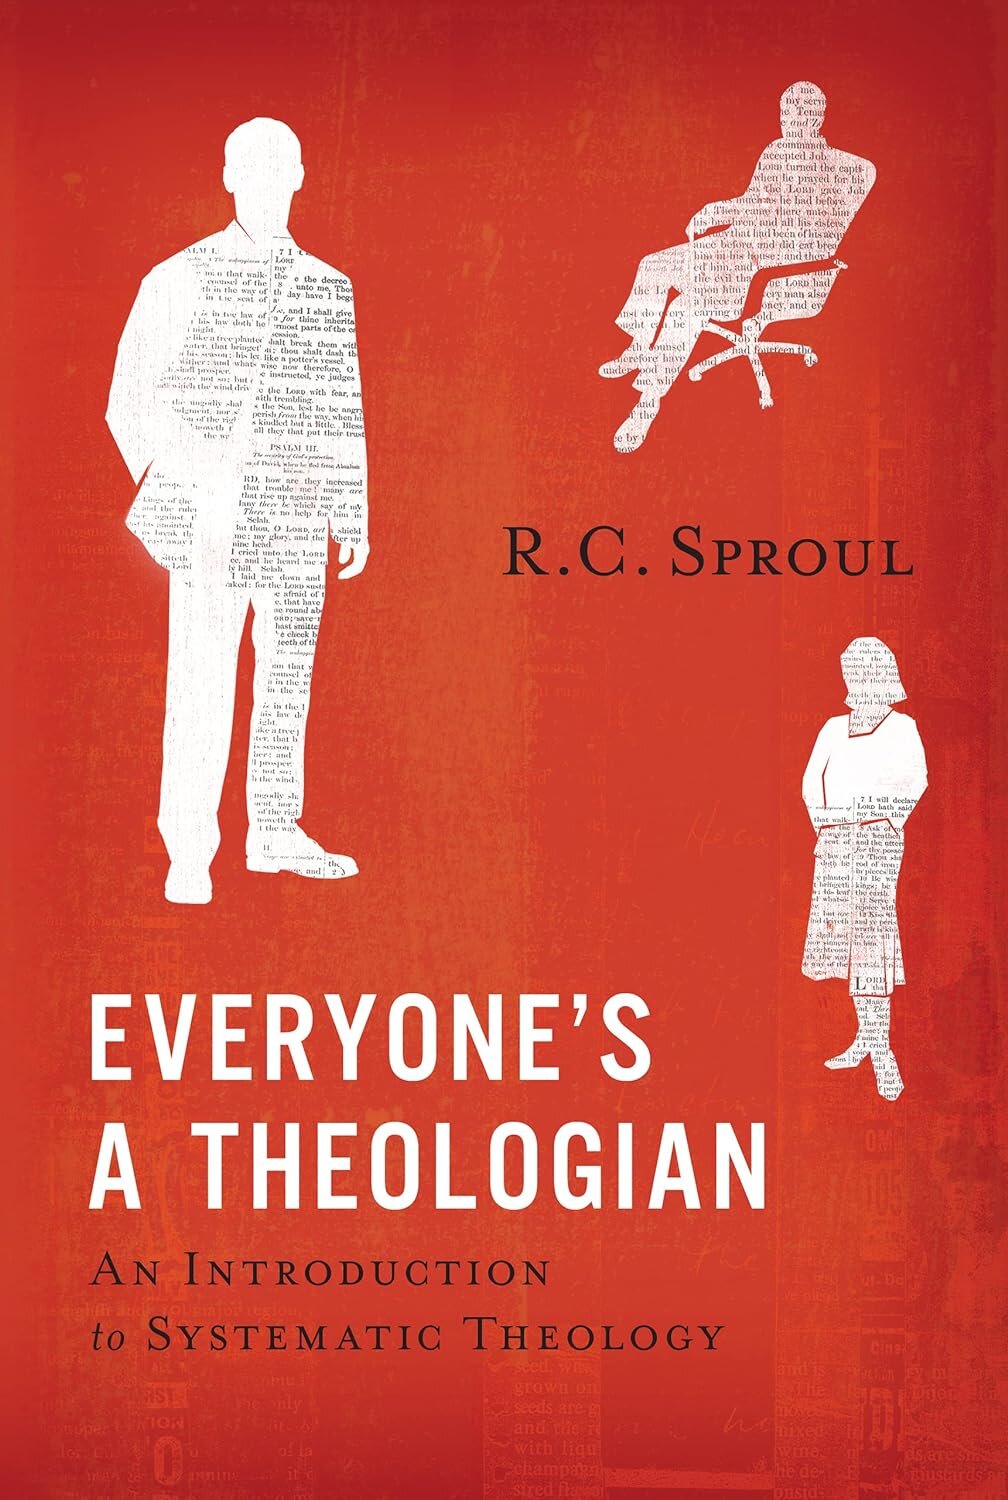 Everyone’s a Theologian: An Introduction to Systematic Theology